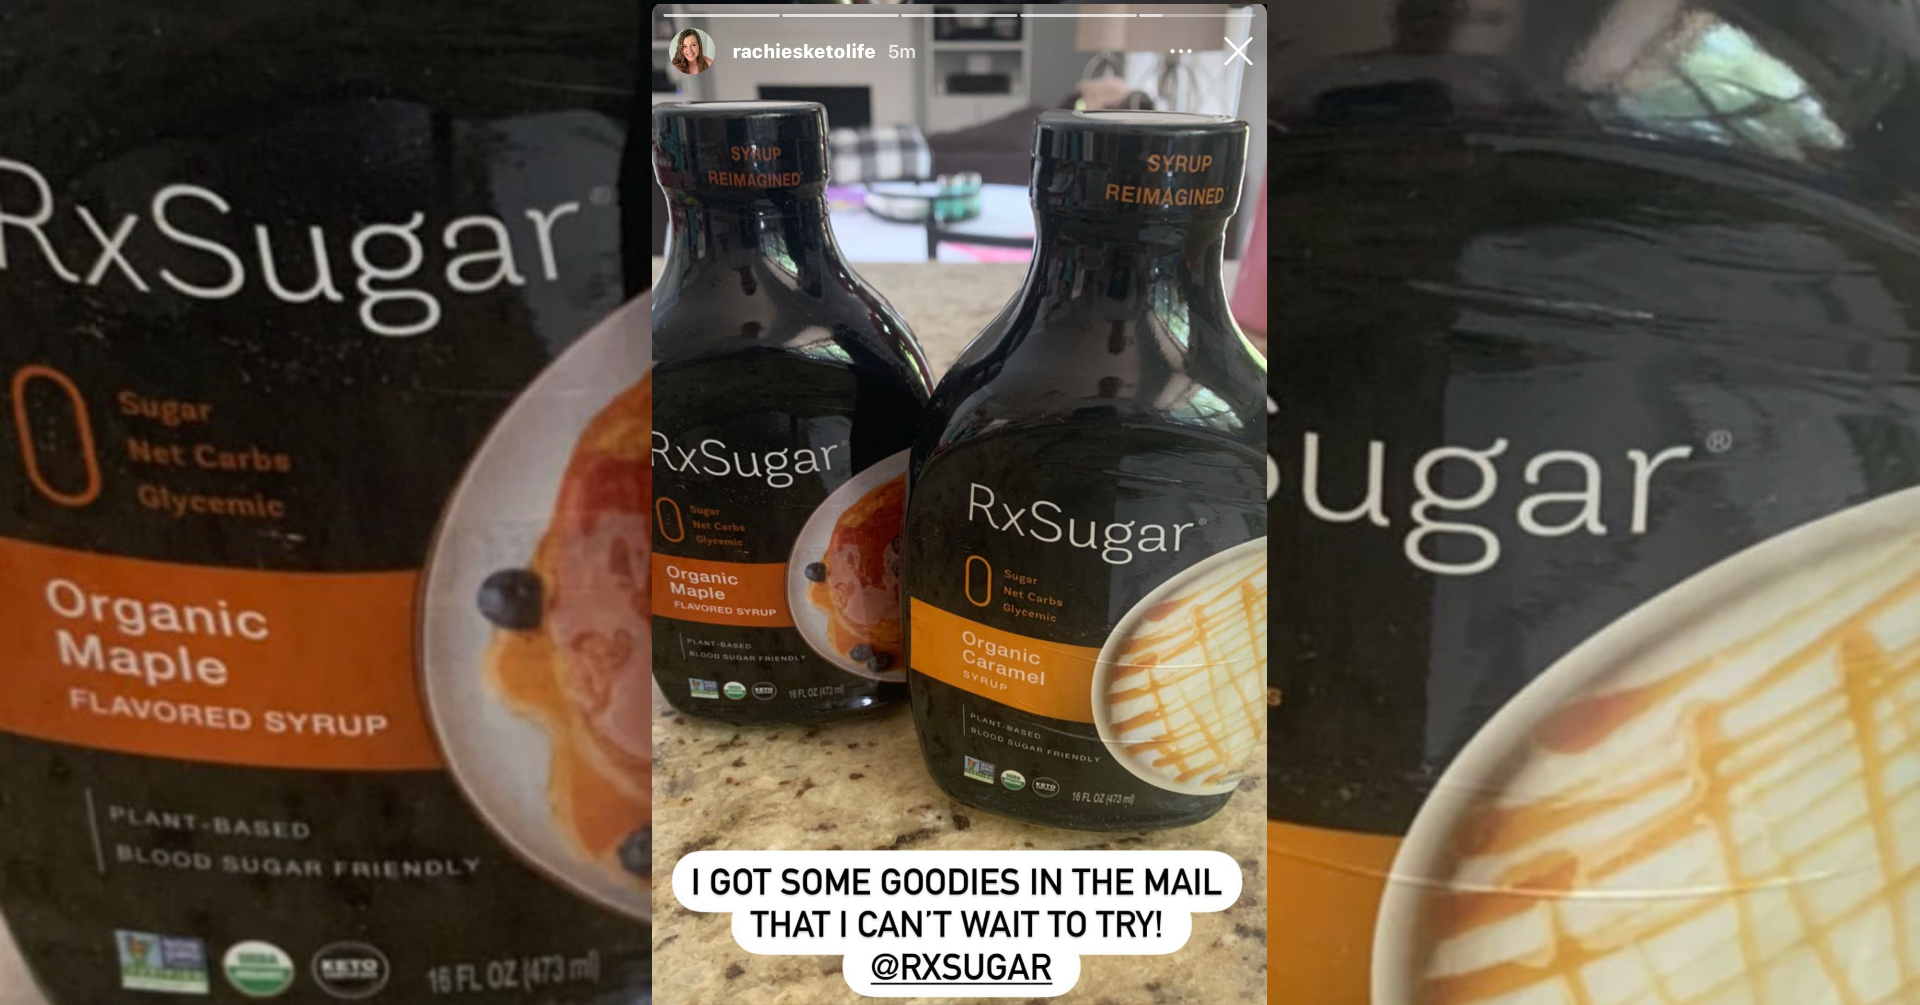 Rachiesketolife & Her New RxSugar Package!